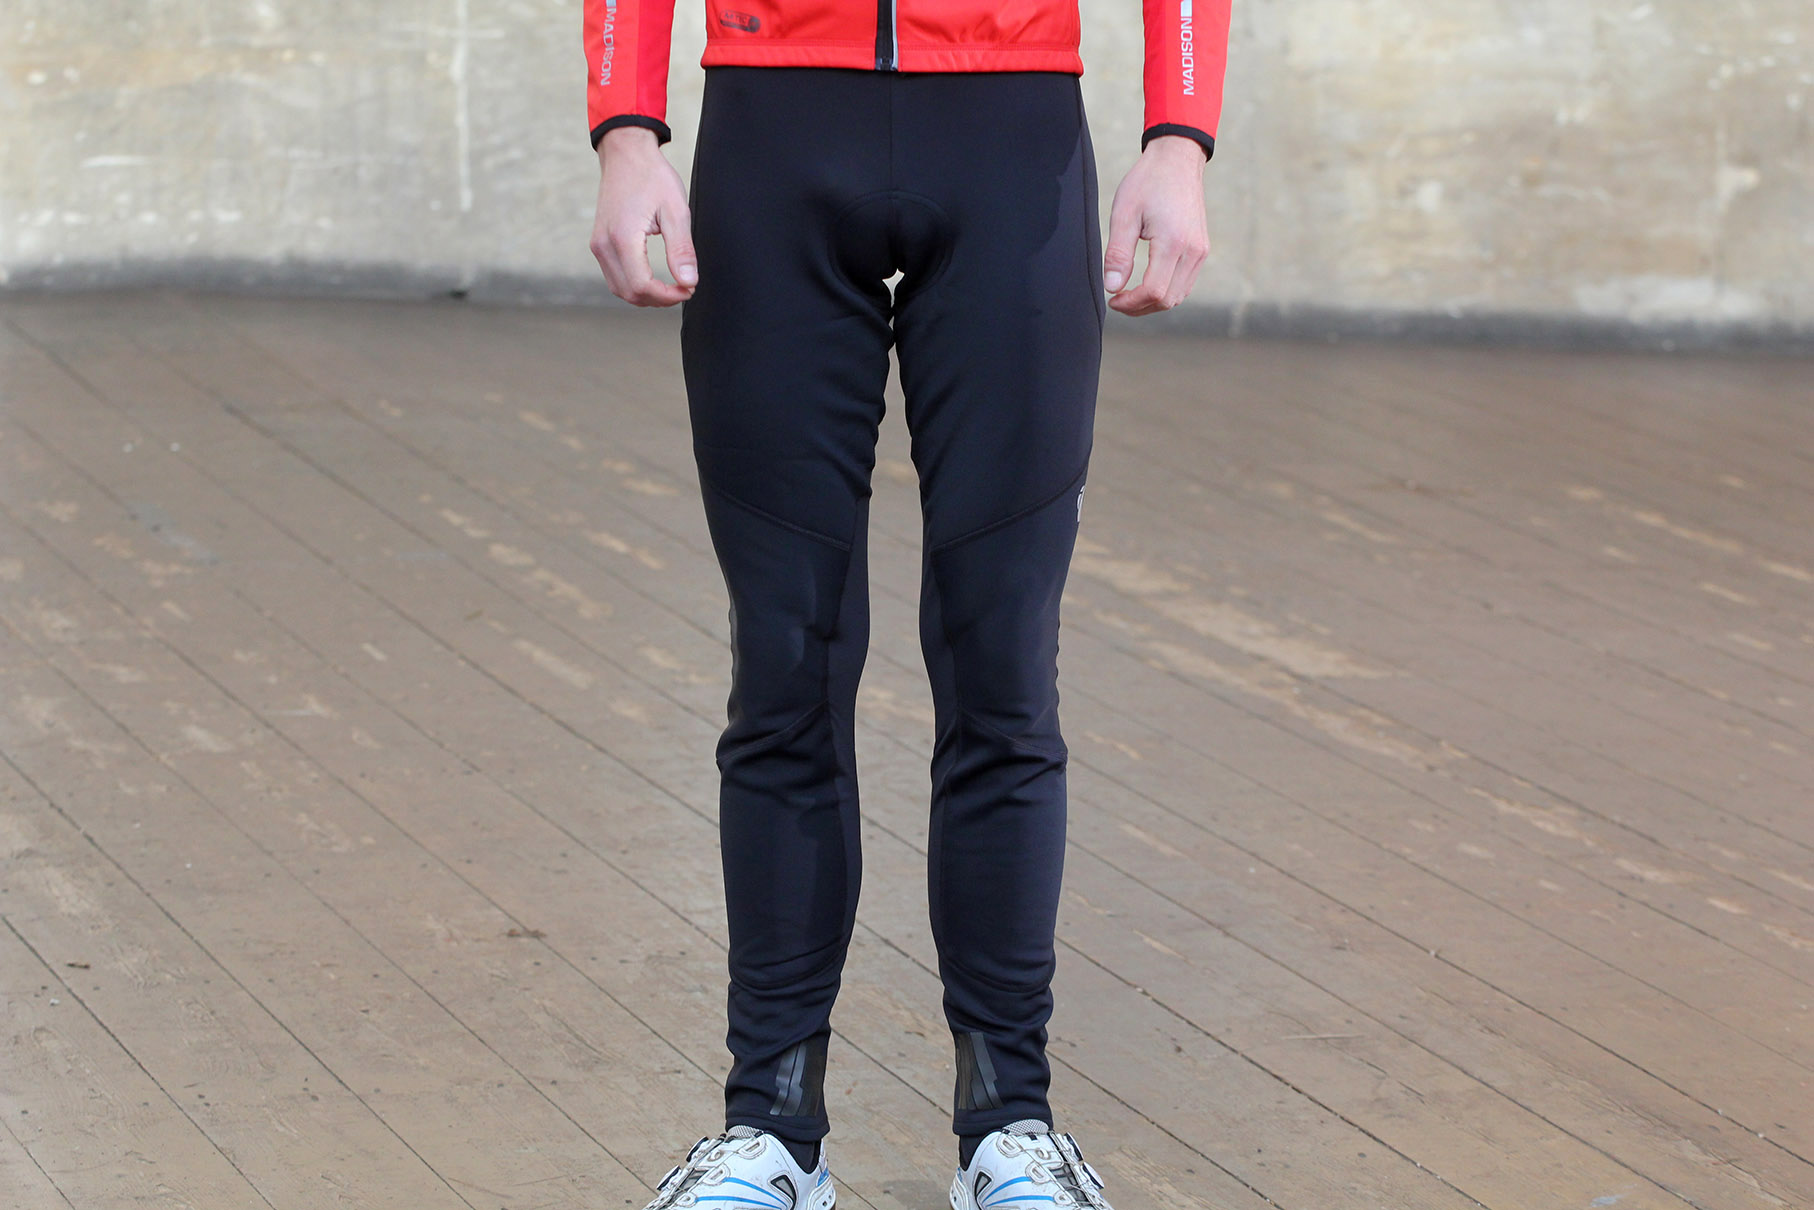 Elite Cycling Tights